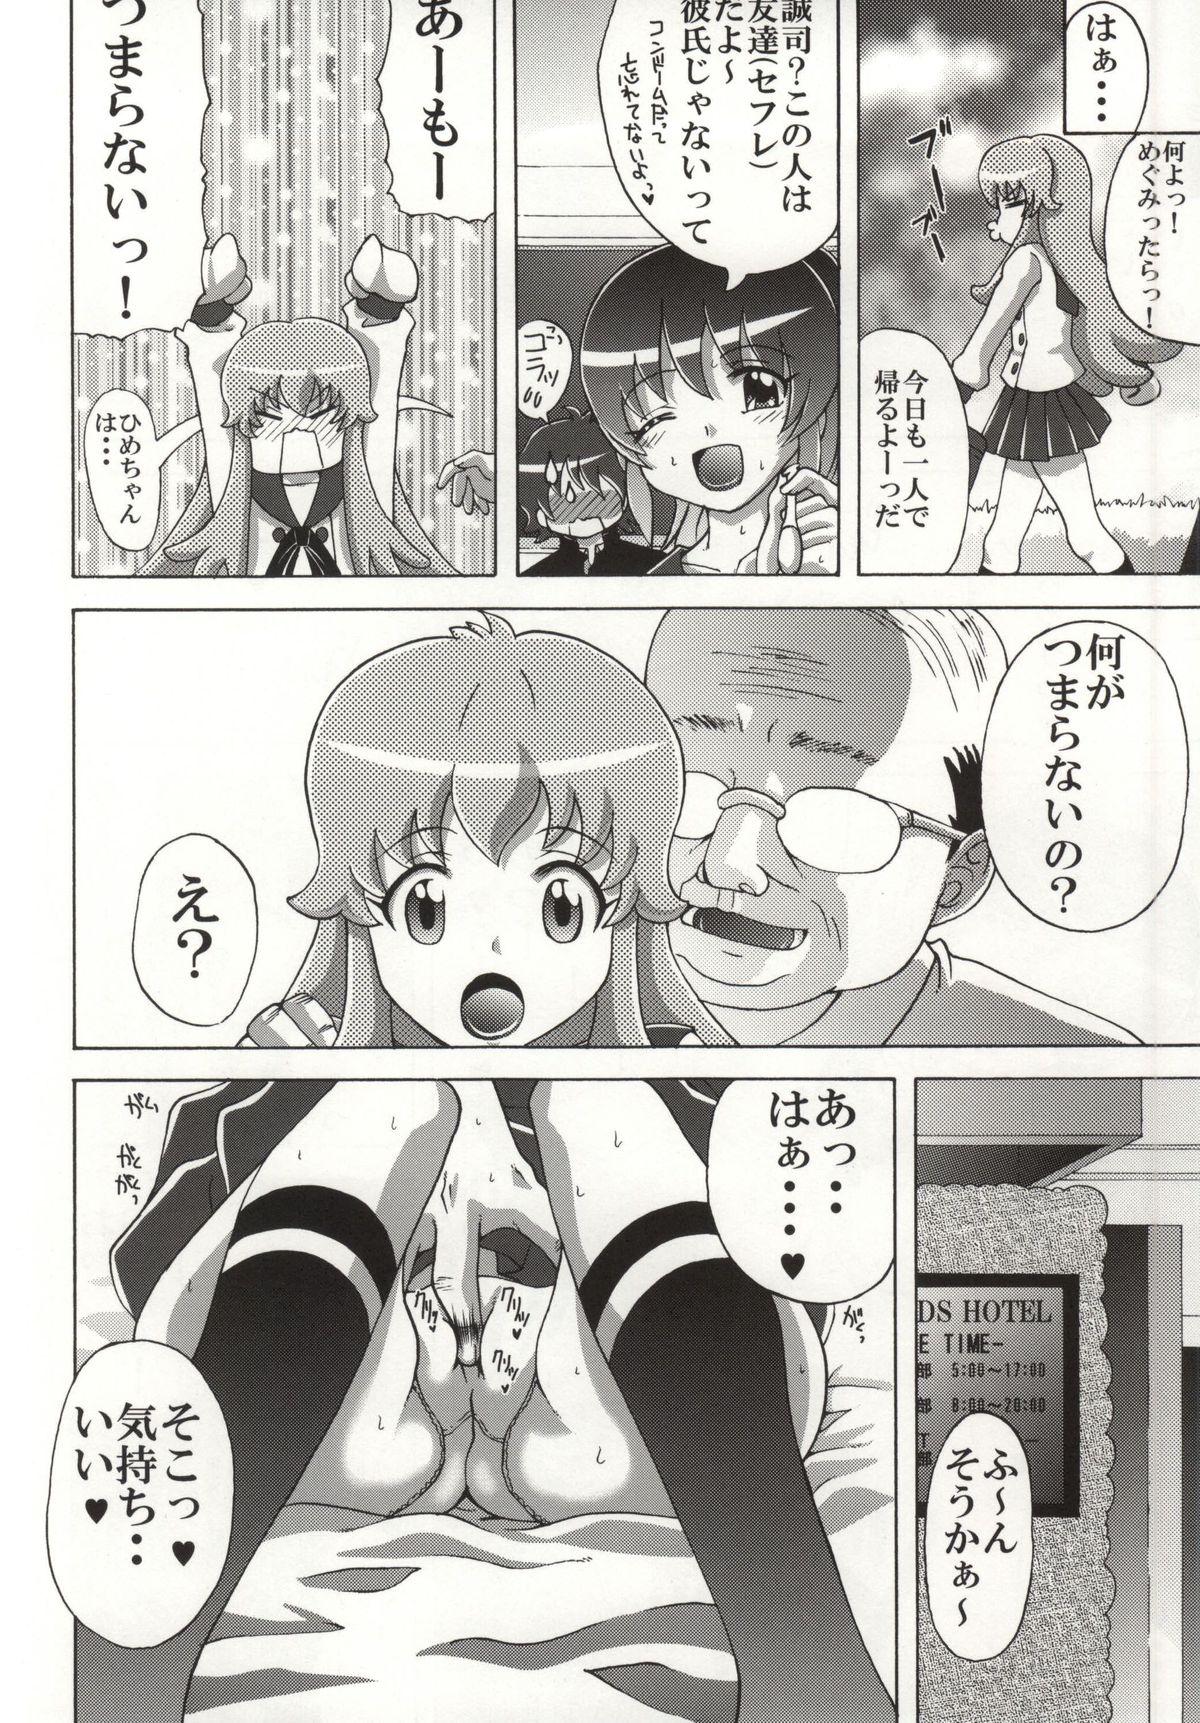 Plump Hime-chan no Tomodachi - Happinesscharge precure Dominatrix - Page 3